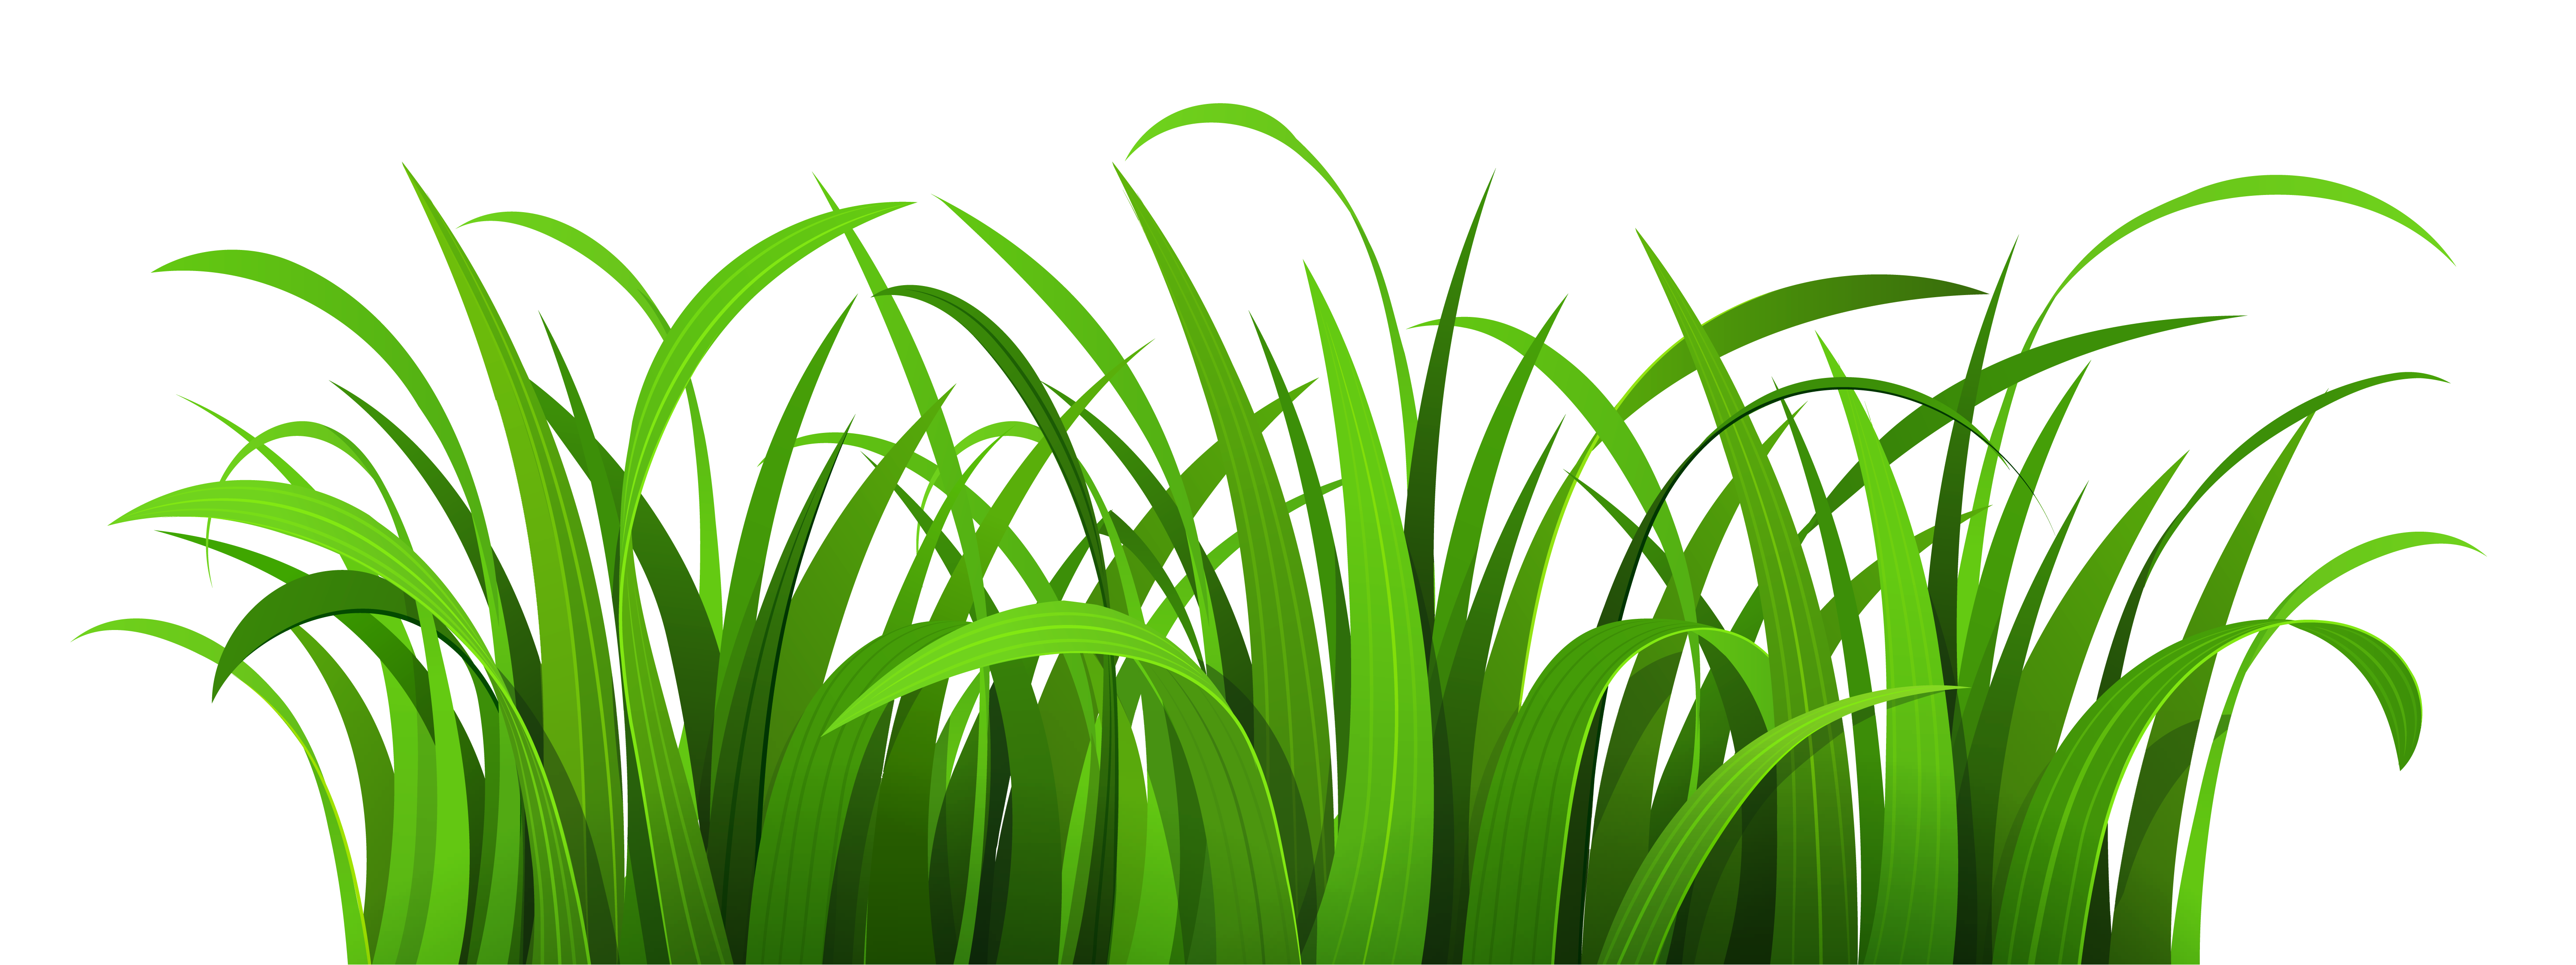 Grass clipart black and white free clipart images